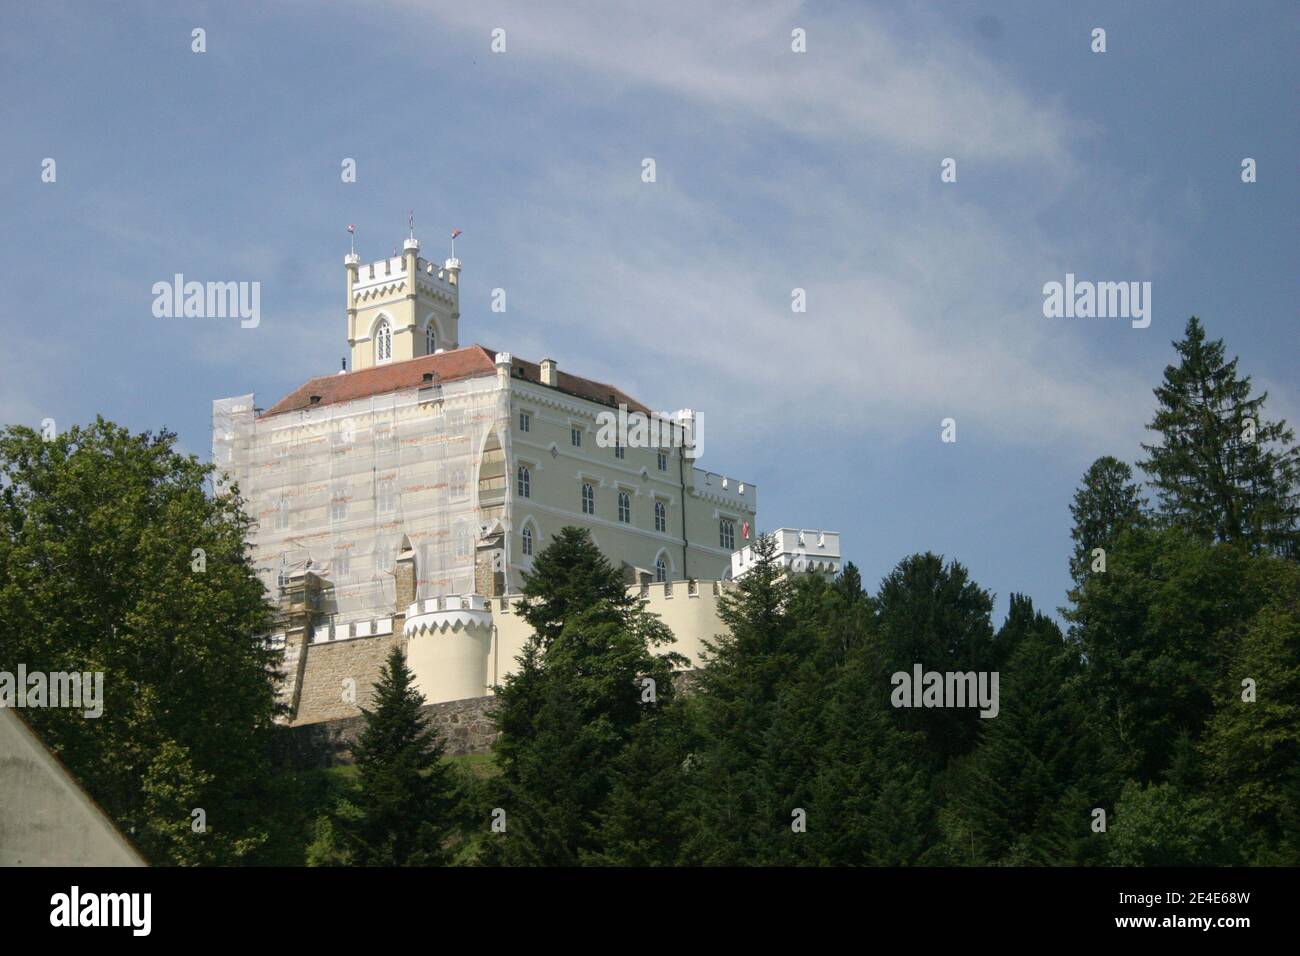 Trakošćan castle - a 13th century burg on a hill, surrounded by pine trees Stock Photo